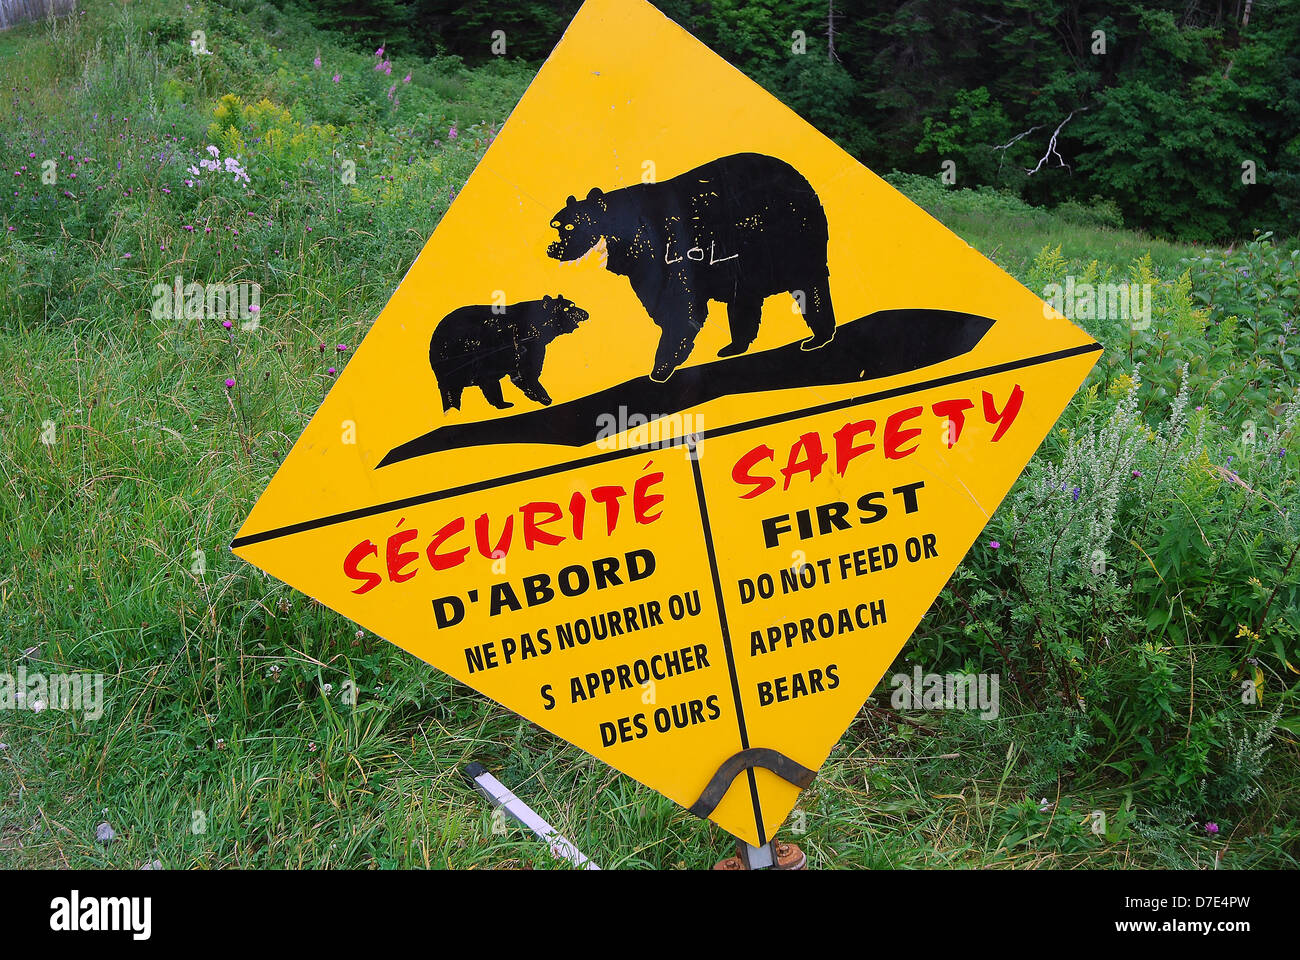 Safety sign for Bear, Quebec Canada Stock Photo